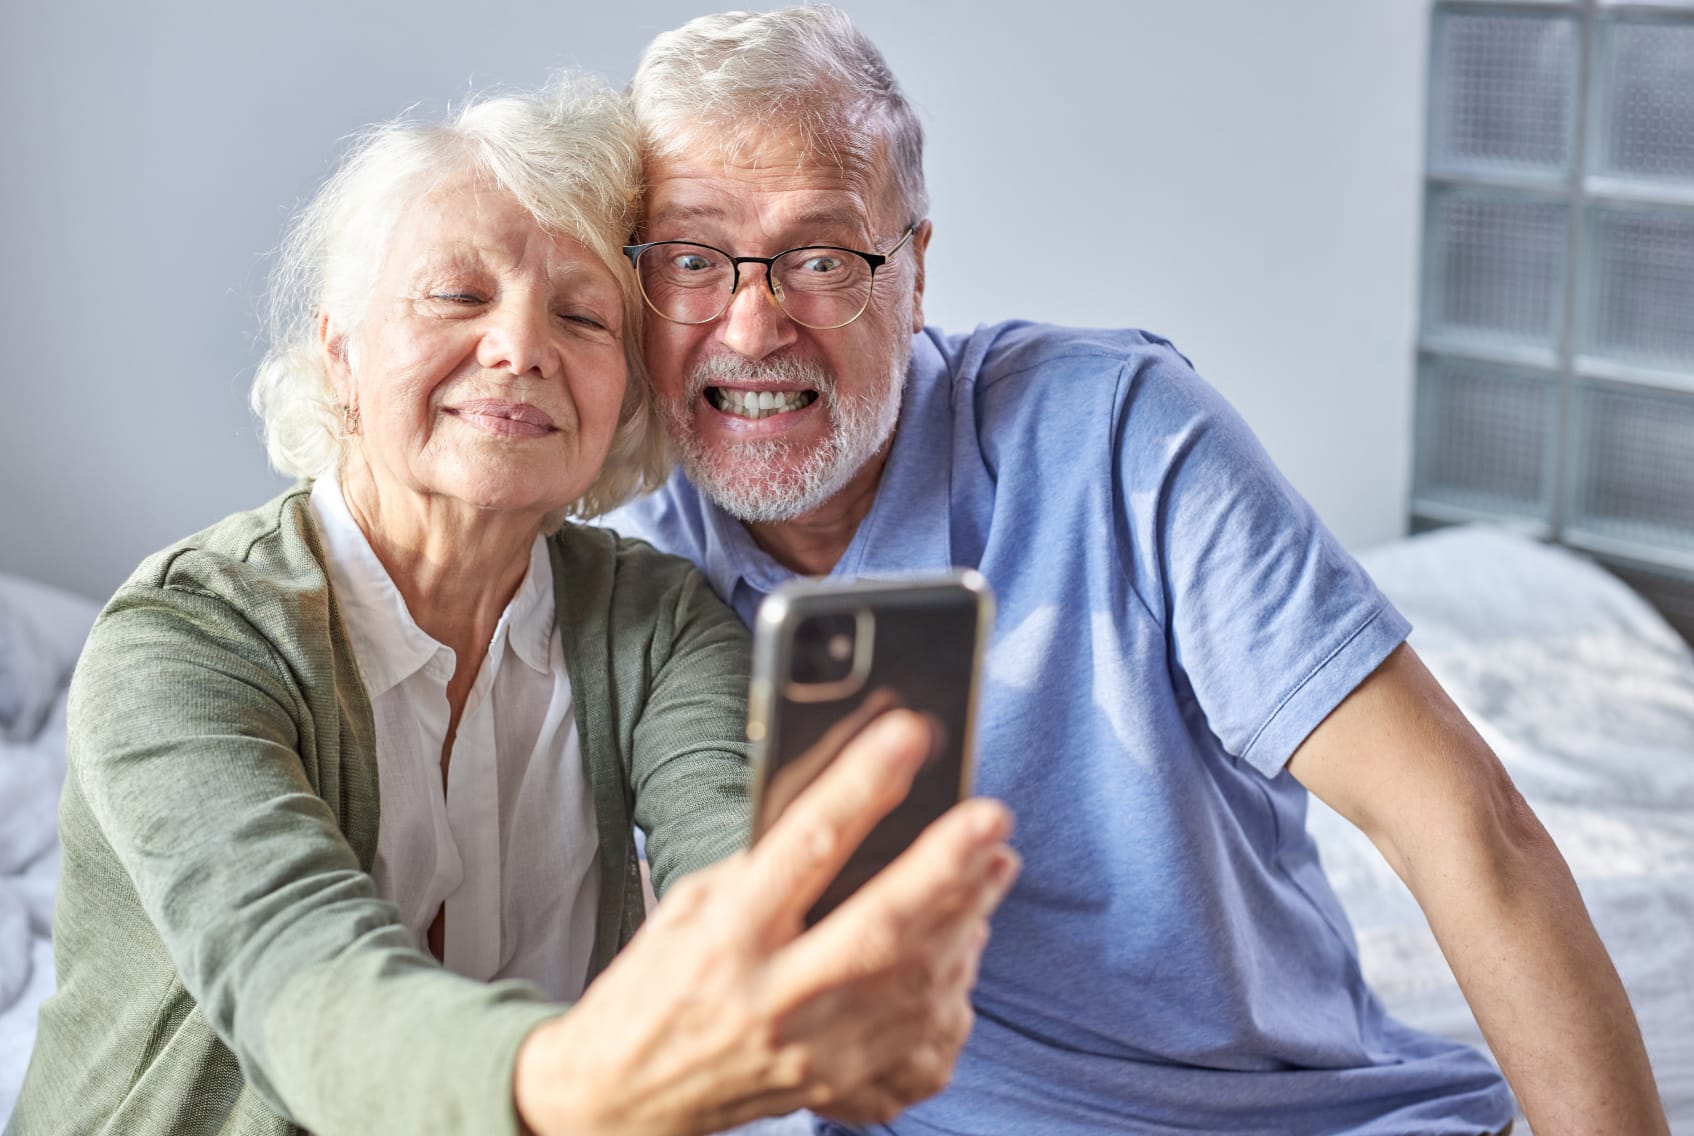 Elderly couple taking a picture together